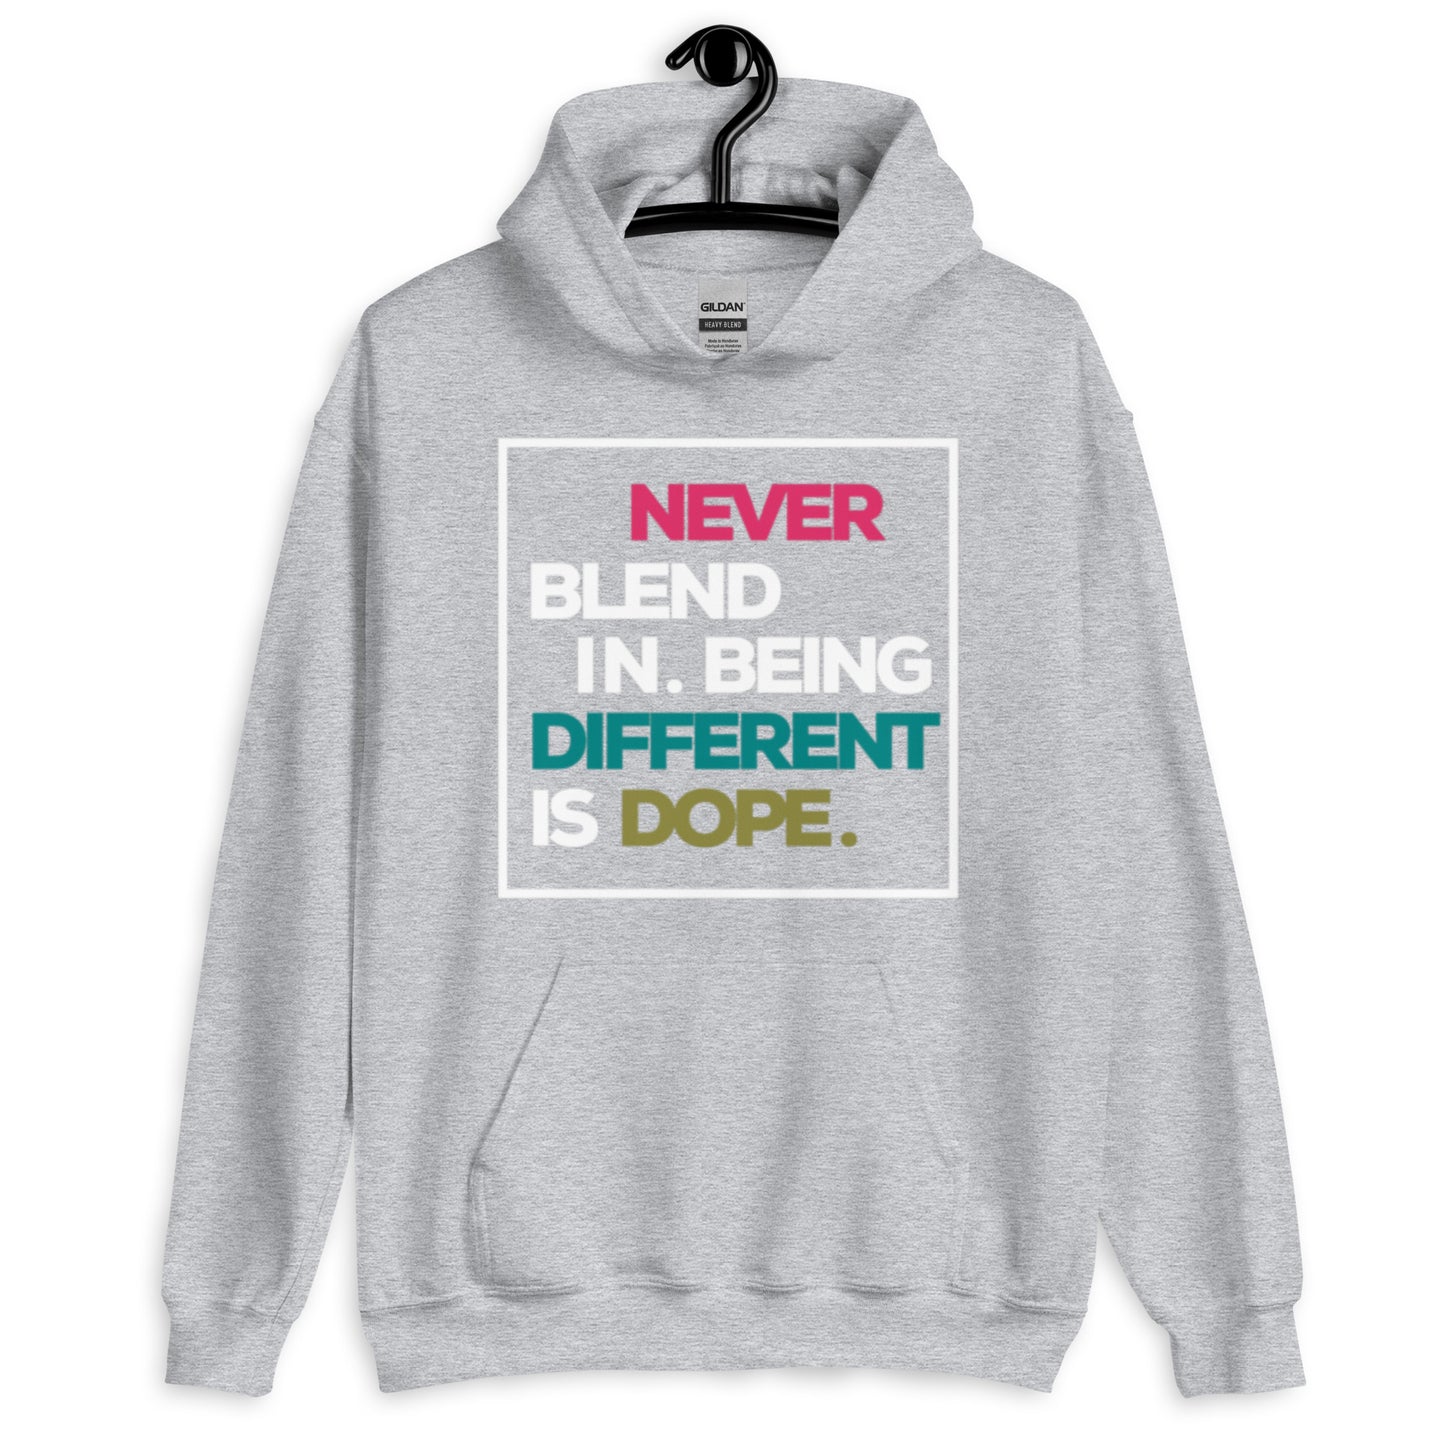 Different is Dope - Unisex Hoodie